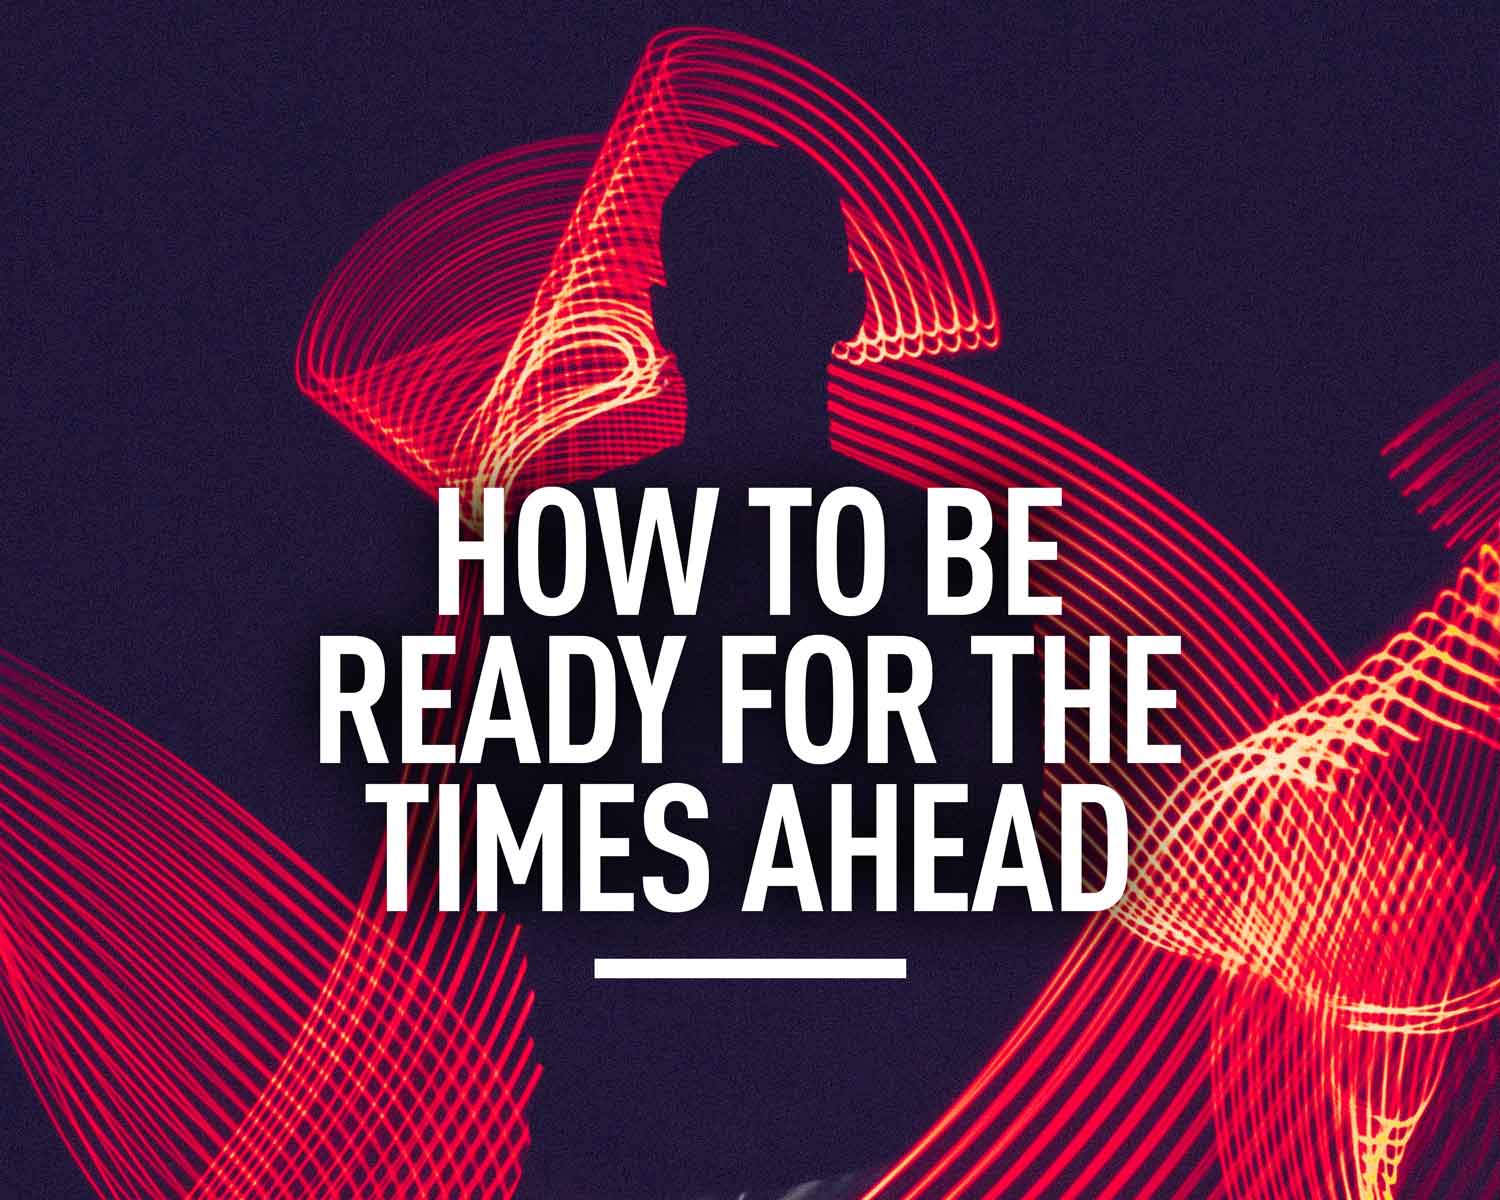 How to be Ready for the Times Ahead